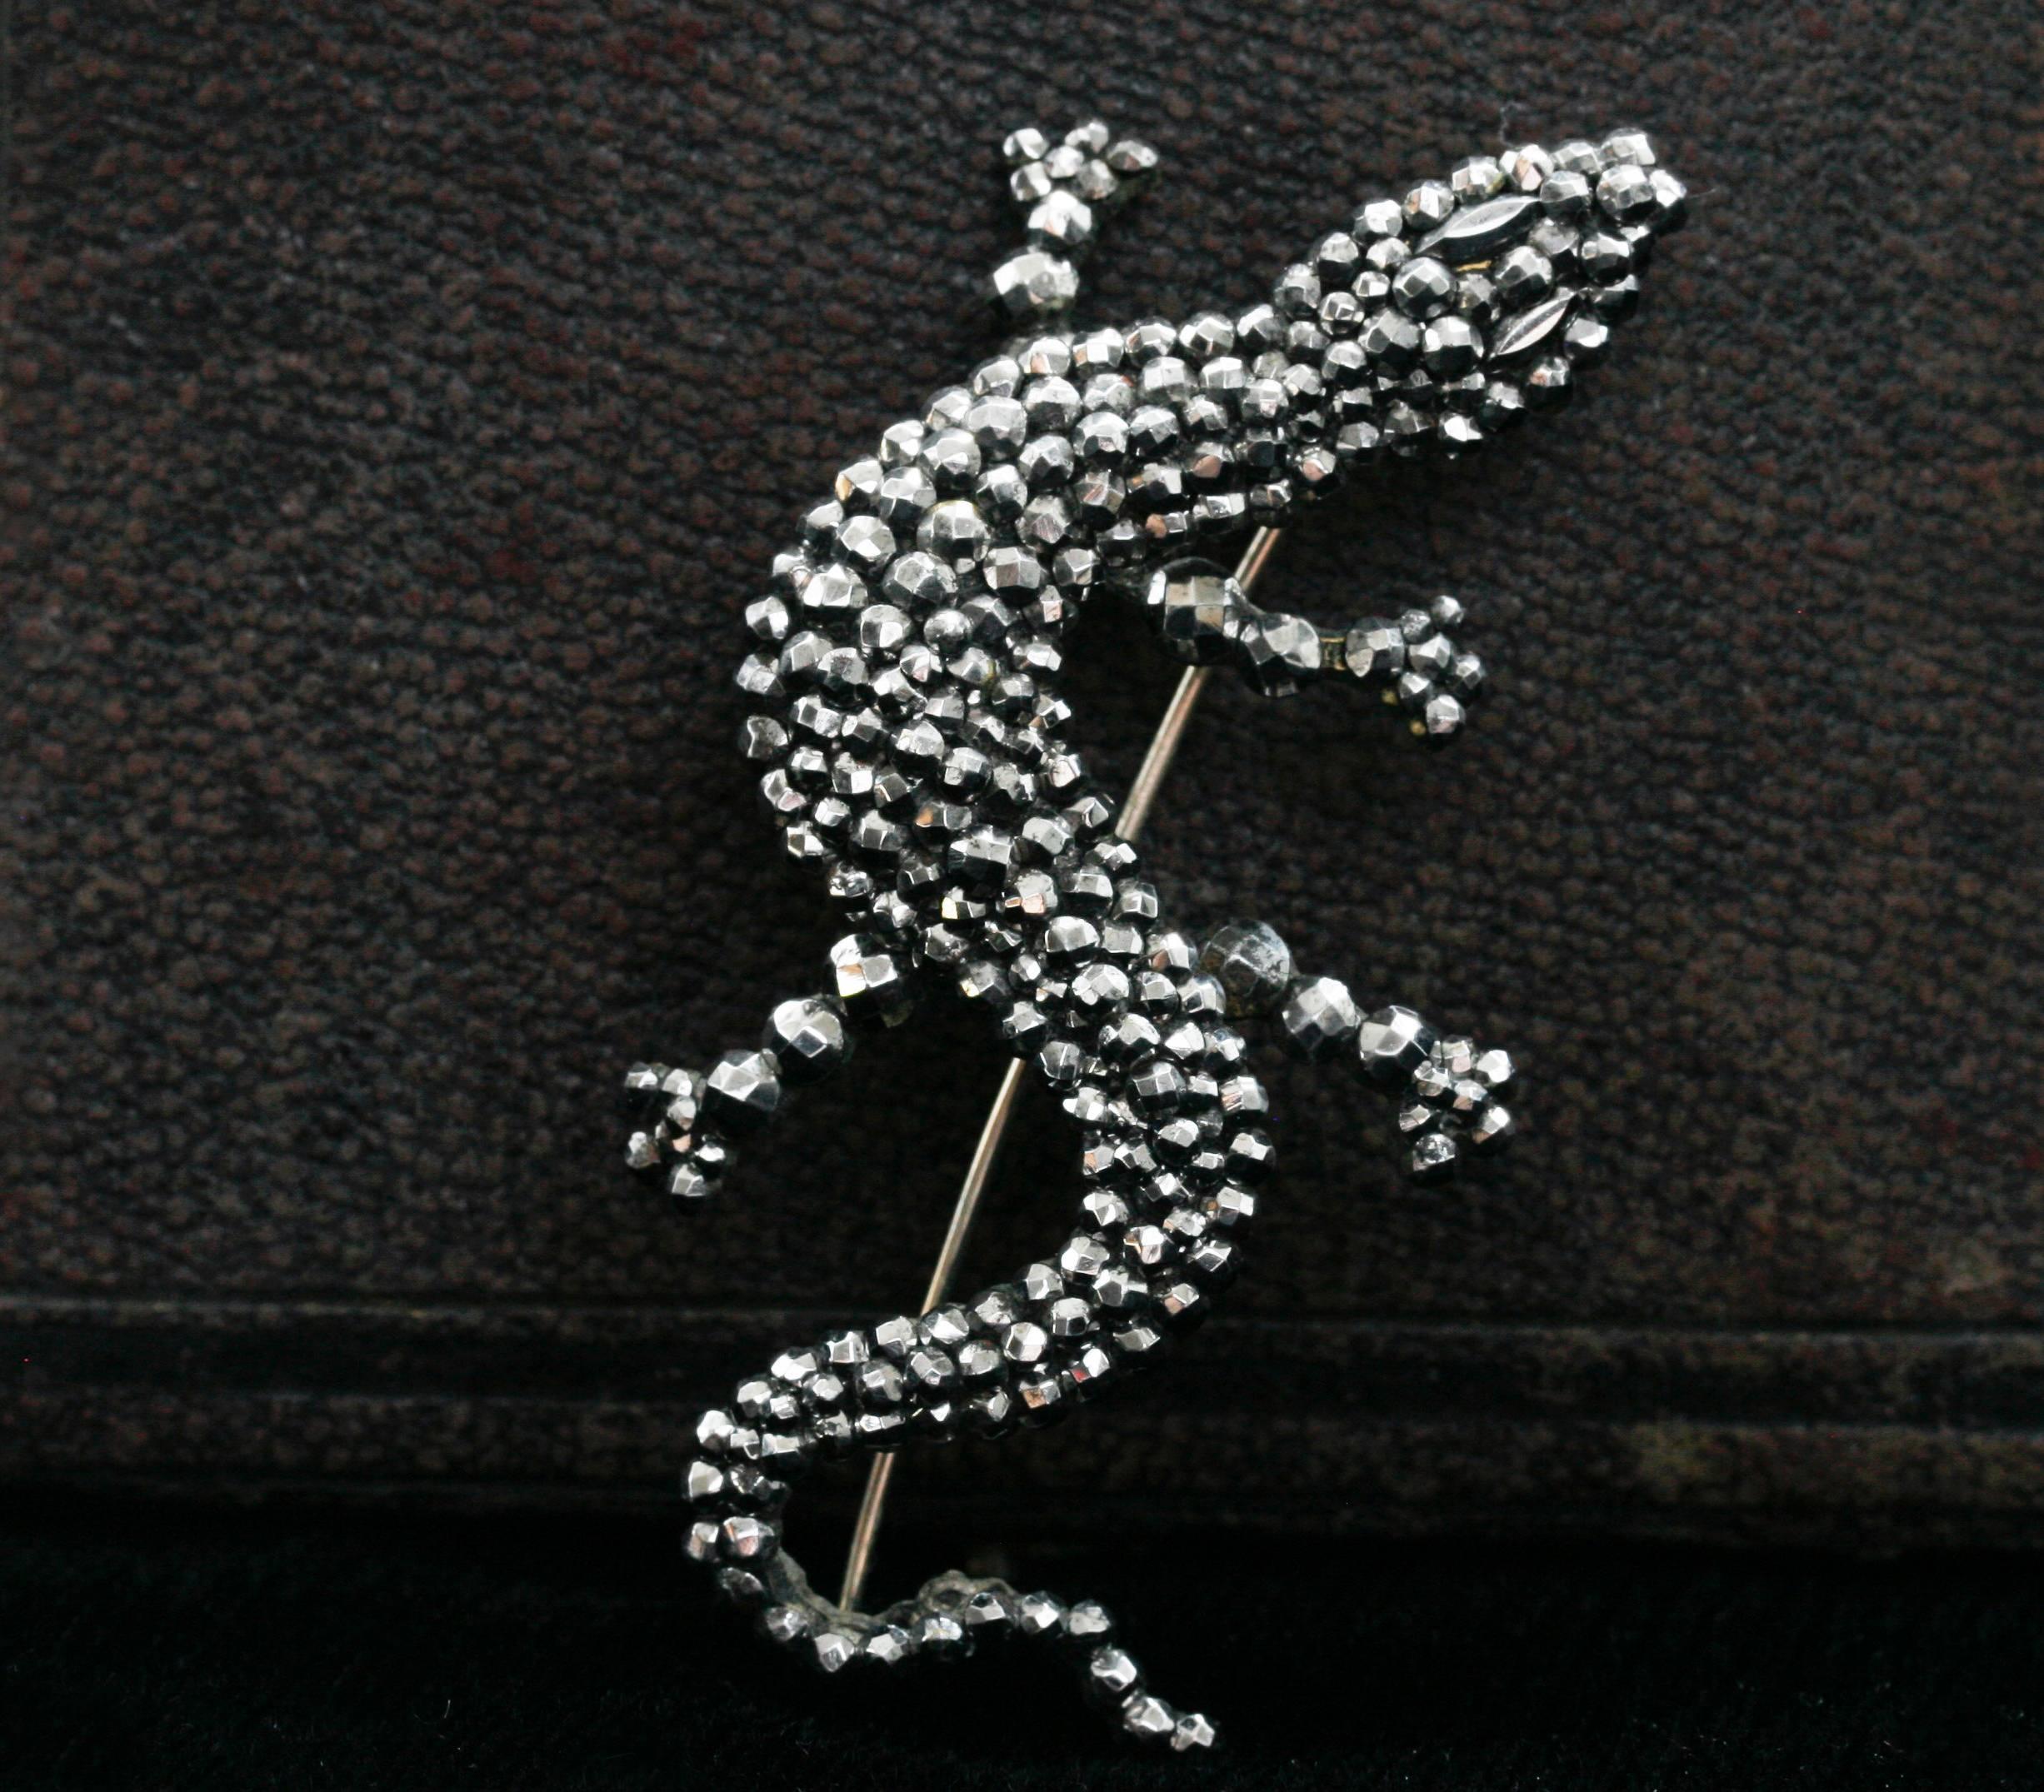 C.1840-1850.  A large cut steel lizard brooch. Cut steel jewelry was introduced in the Georgian era around the mid-1700s. This particular type of jewelry is made with polished steel-faceted studs to create a beautiful, dazzling diamond effect. Cut